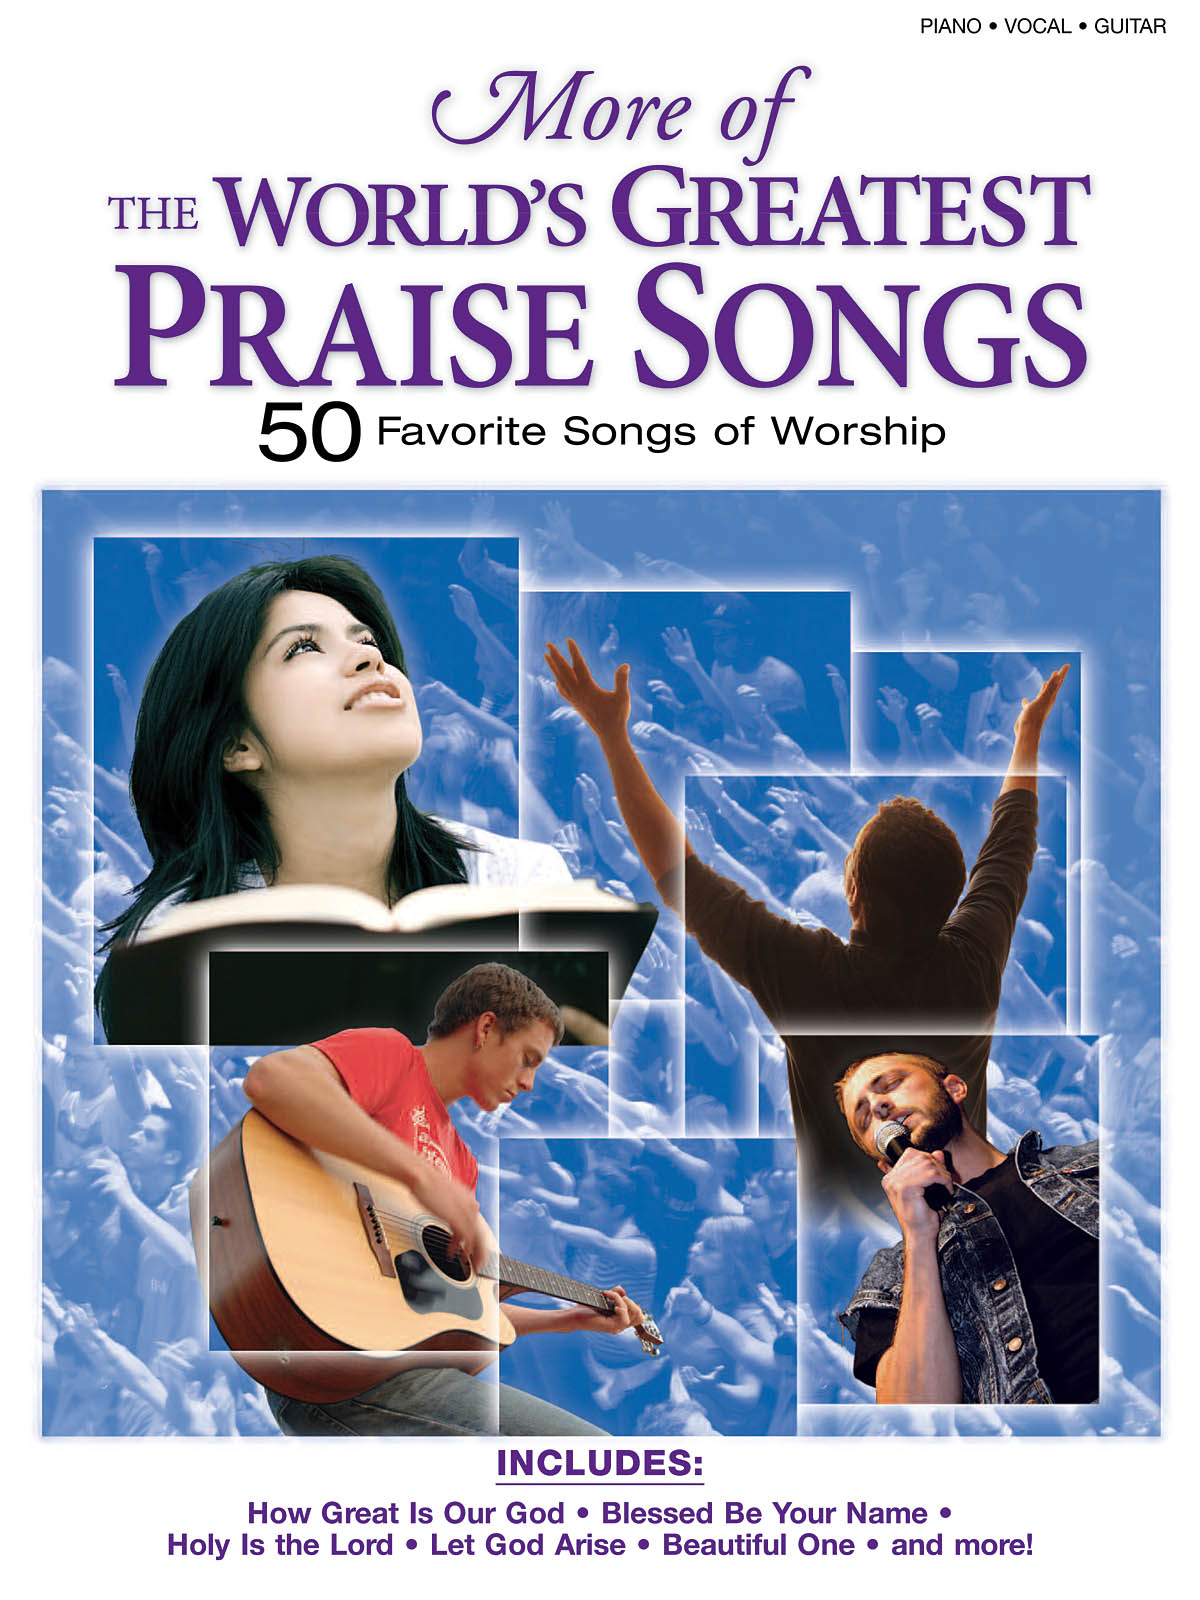 More of the World's Greatest Praise Songs